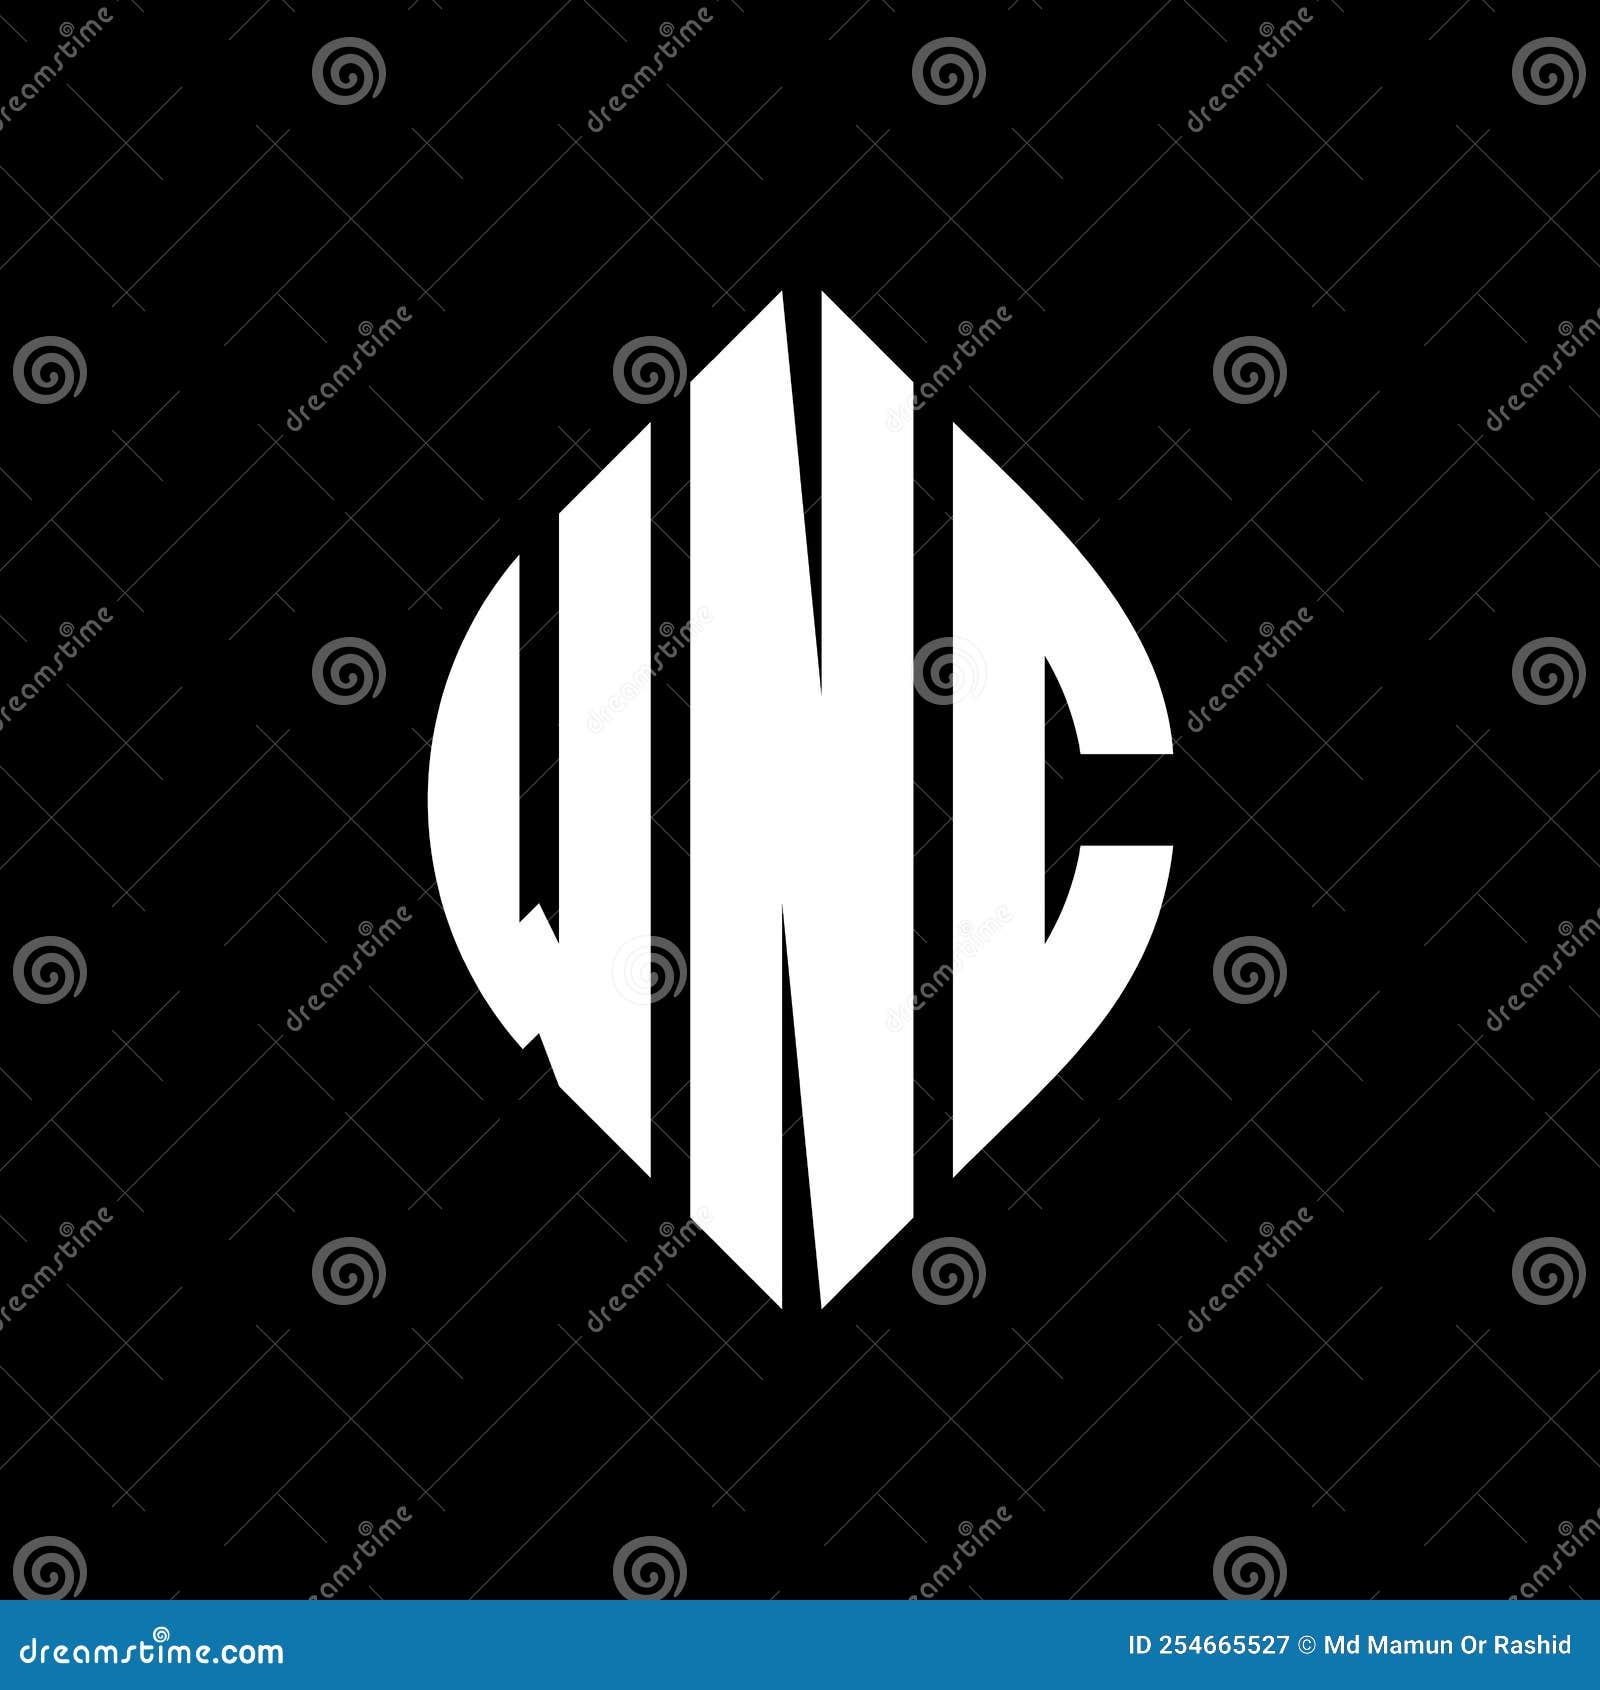 wnc circle letter logo  with circle and ellipse . wnc ellipse letters with typographic style. the three initials form a